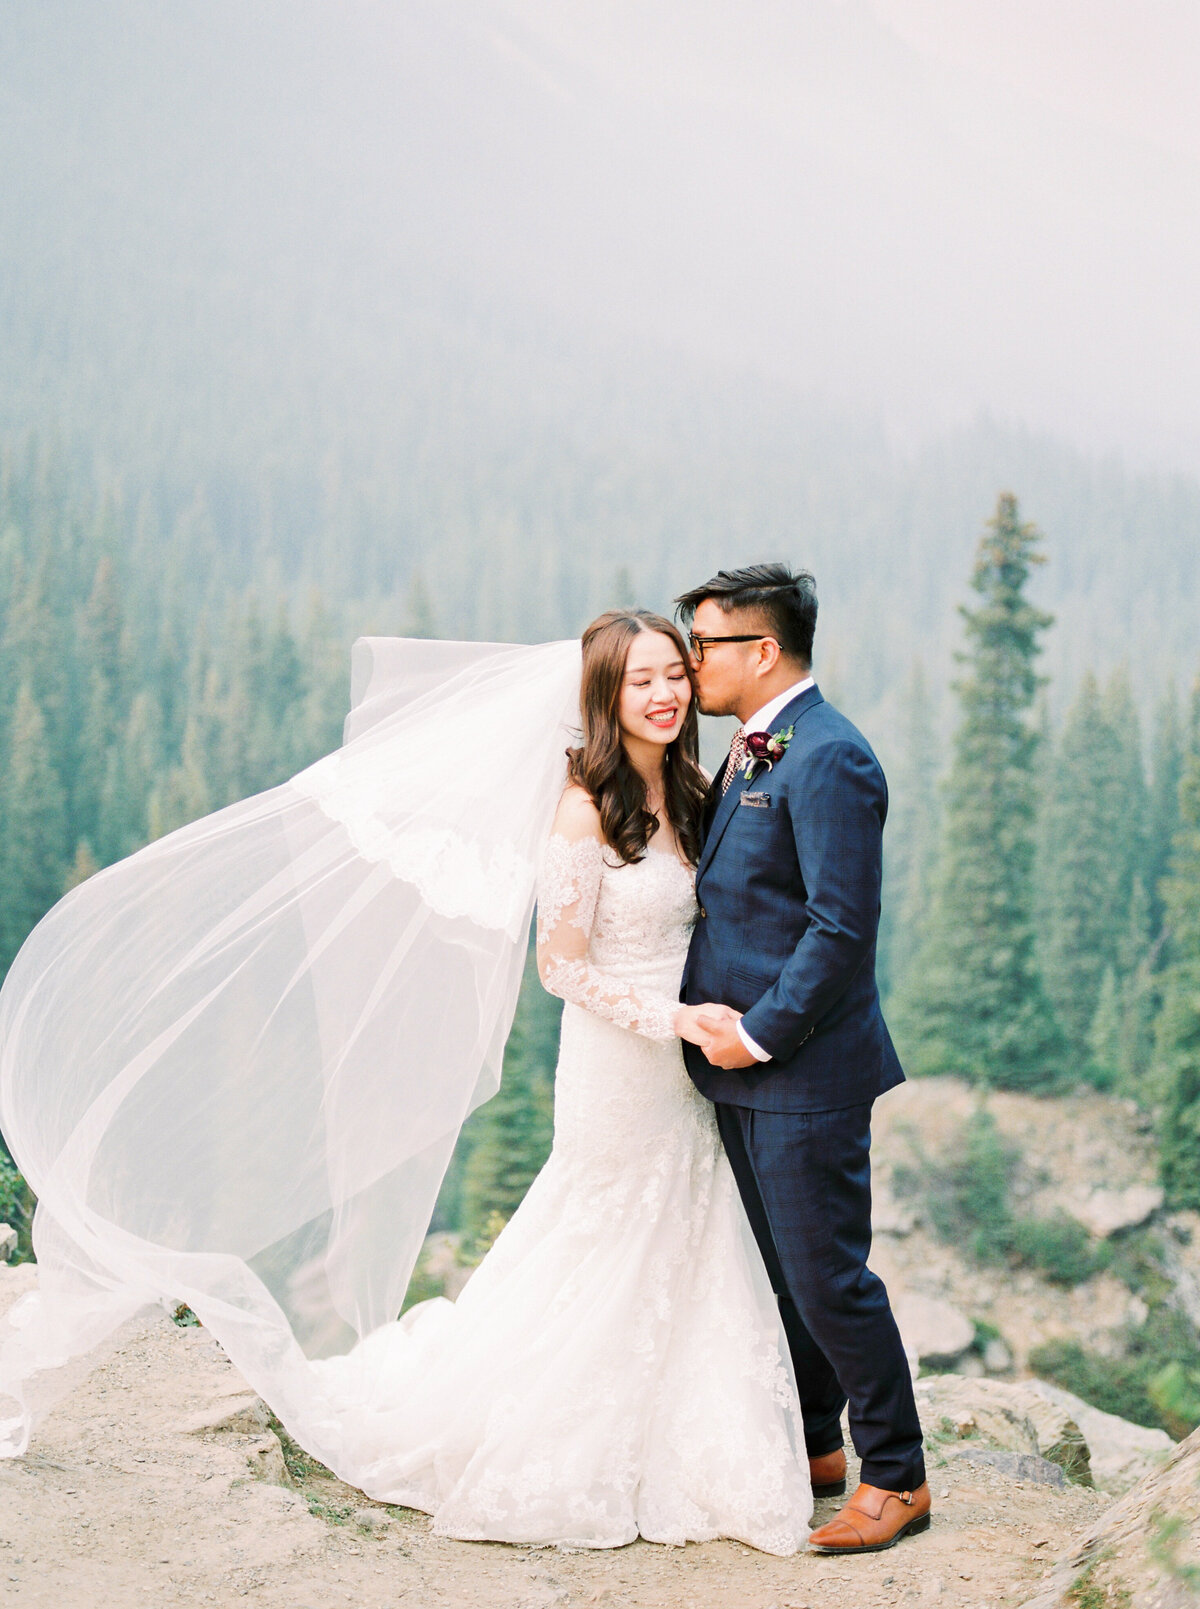 Classic bridal portrait captured by Minted Photography, fine art and romantic wedding photographer in Okanagan, BC. Featured on the Bronte Bride Vendor Guide.